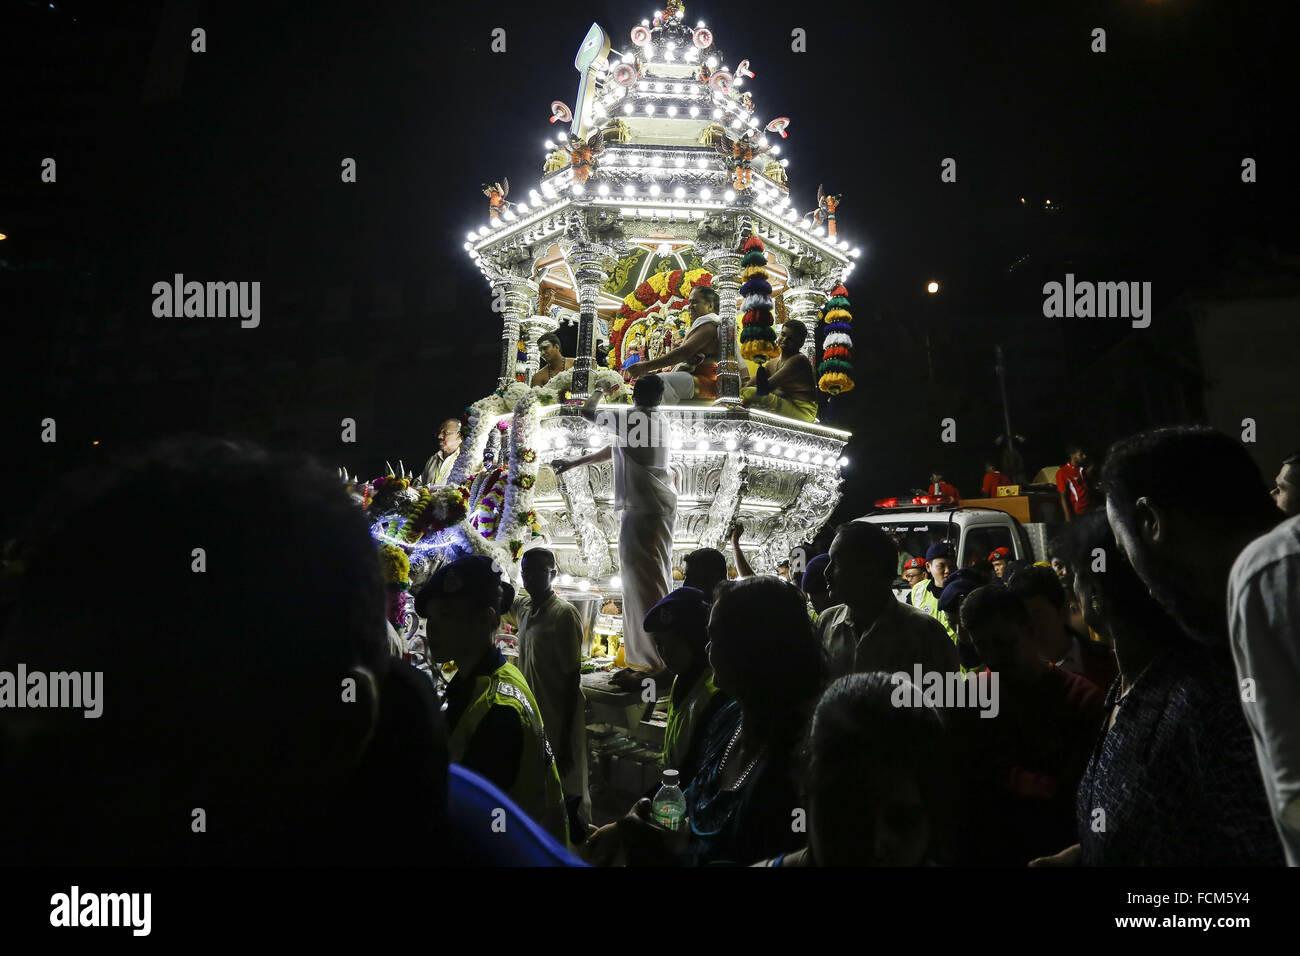 Kl, KL, Malaysia. 22nd Jan, 2016. Malaysian Hindu devotees gather around the chariot carrying a statue of Lord Murugan during a procession on the early morning of the Thaipusam festival in Kuala Lumpur, Malaysia, 23 January 2016. Devotees will gather in a large group and walk to the main temple at Batu Cave with the chariot during the Thaipusam festival to fulfill their vows and offer thanks to Lord Murugan. © Mohd Hafiz/ZUMA Wire/Alamy Live News Stock Photo